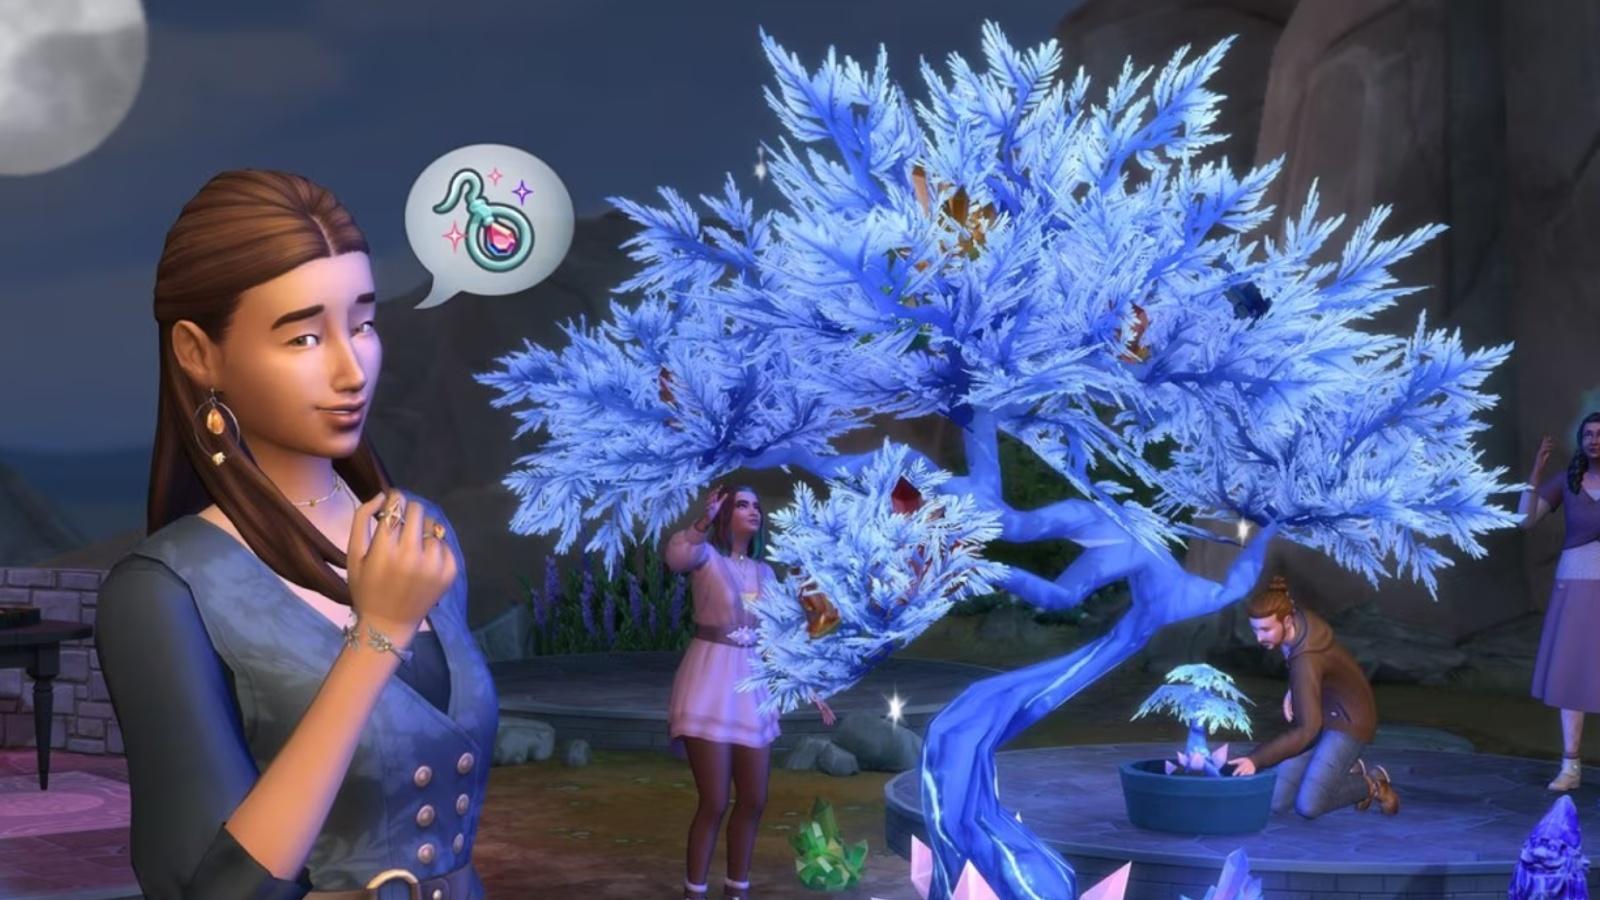 Cover art featuring the Crystal Tree from The Sims 4's Crystal Creations stuff pack.